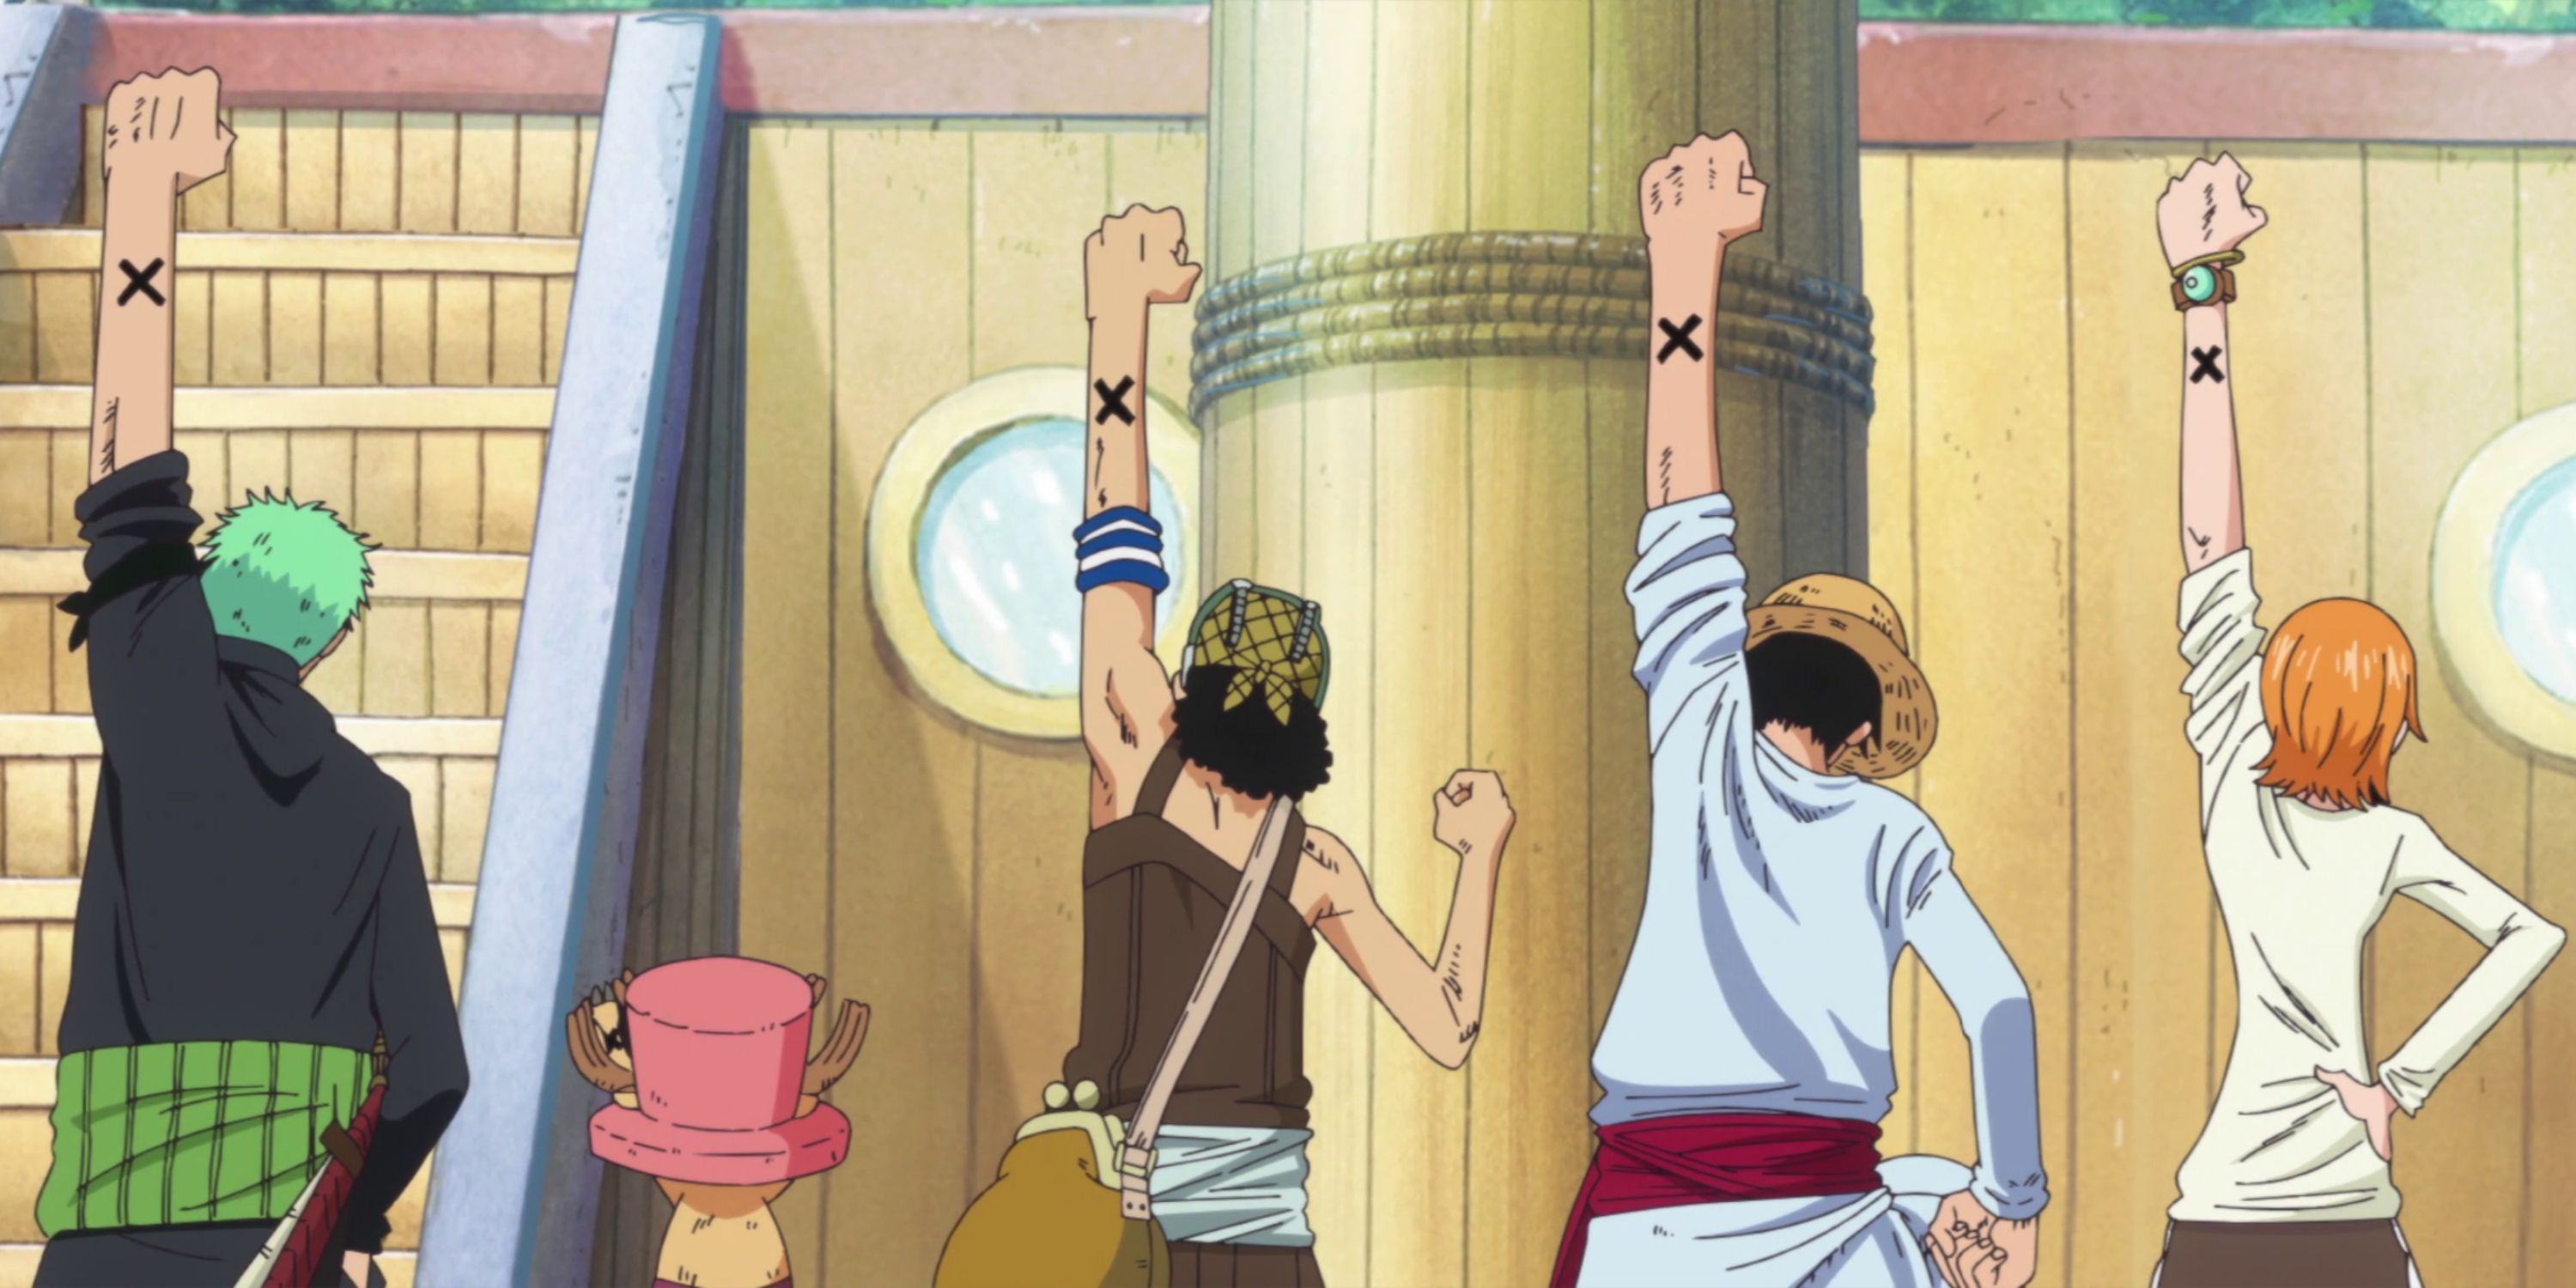 The crew let Alabasta hold hands in the air, with the X tattoo from One Piece